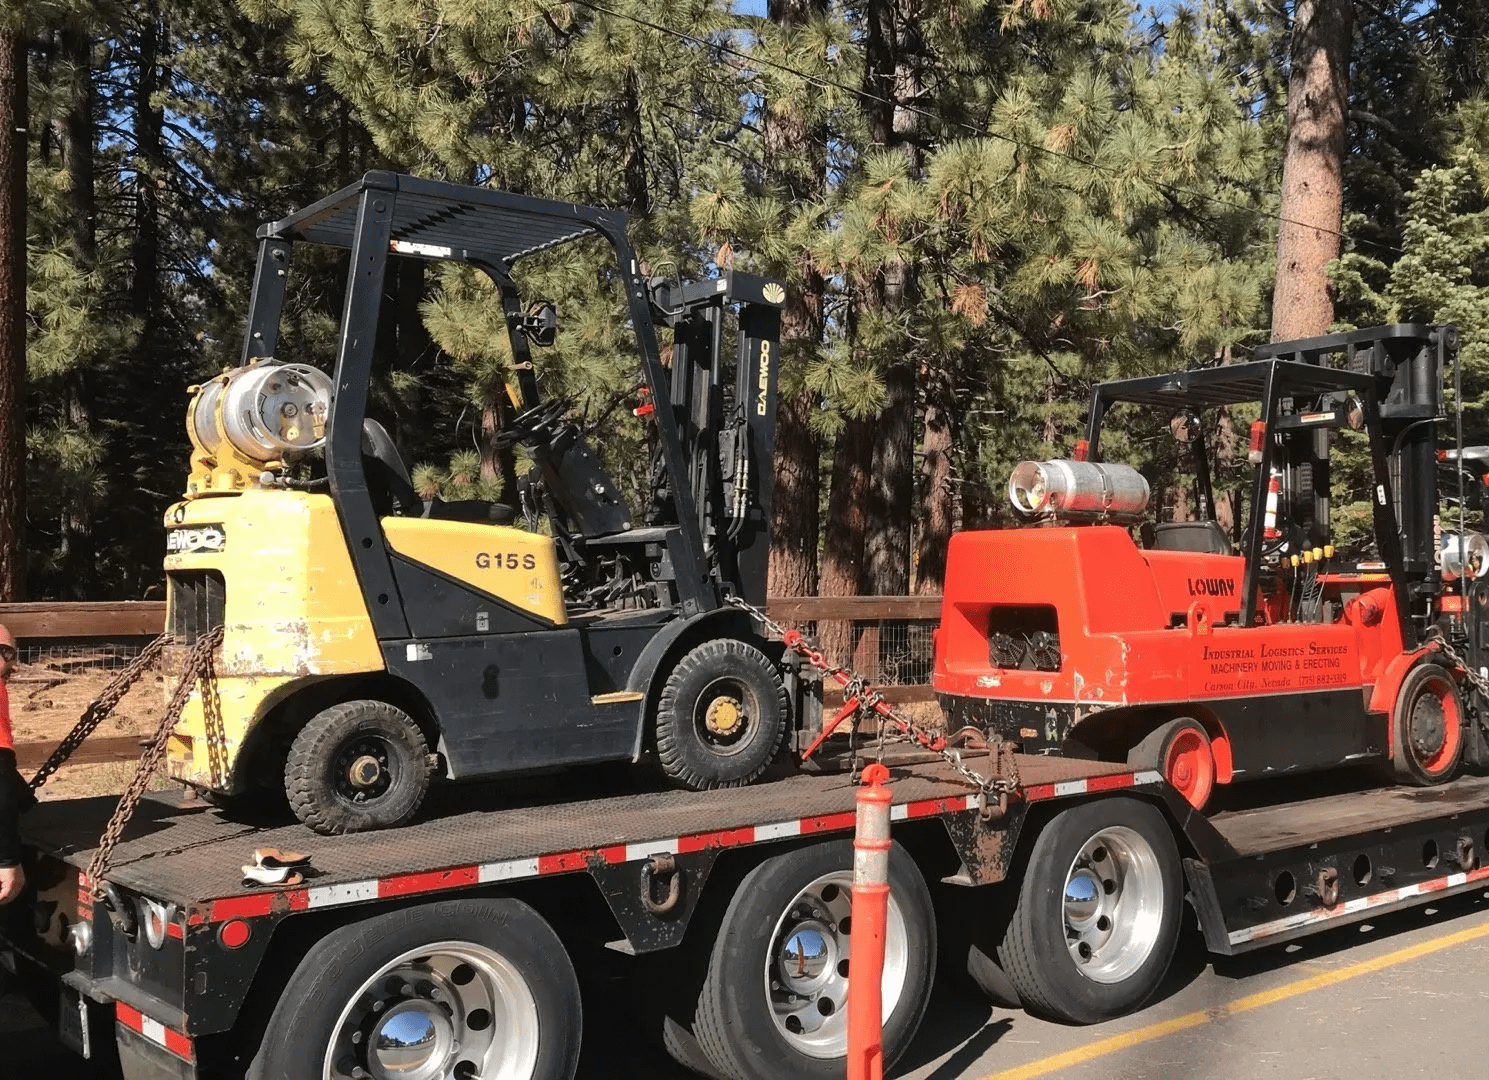 Truck and trailer hauling 2 large forklifts